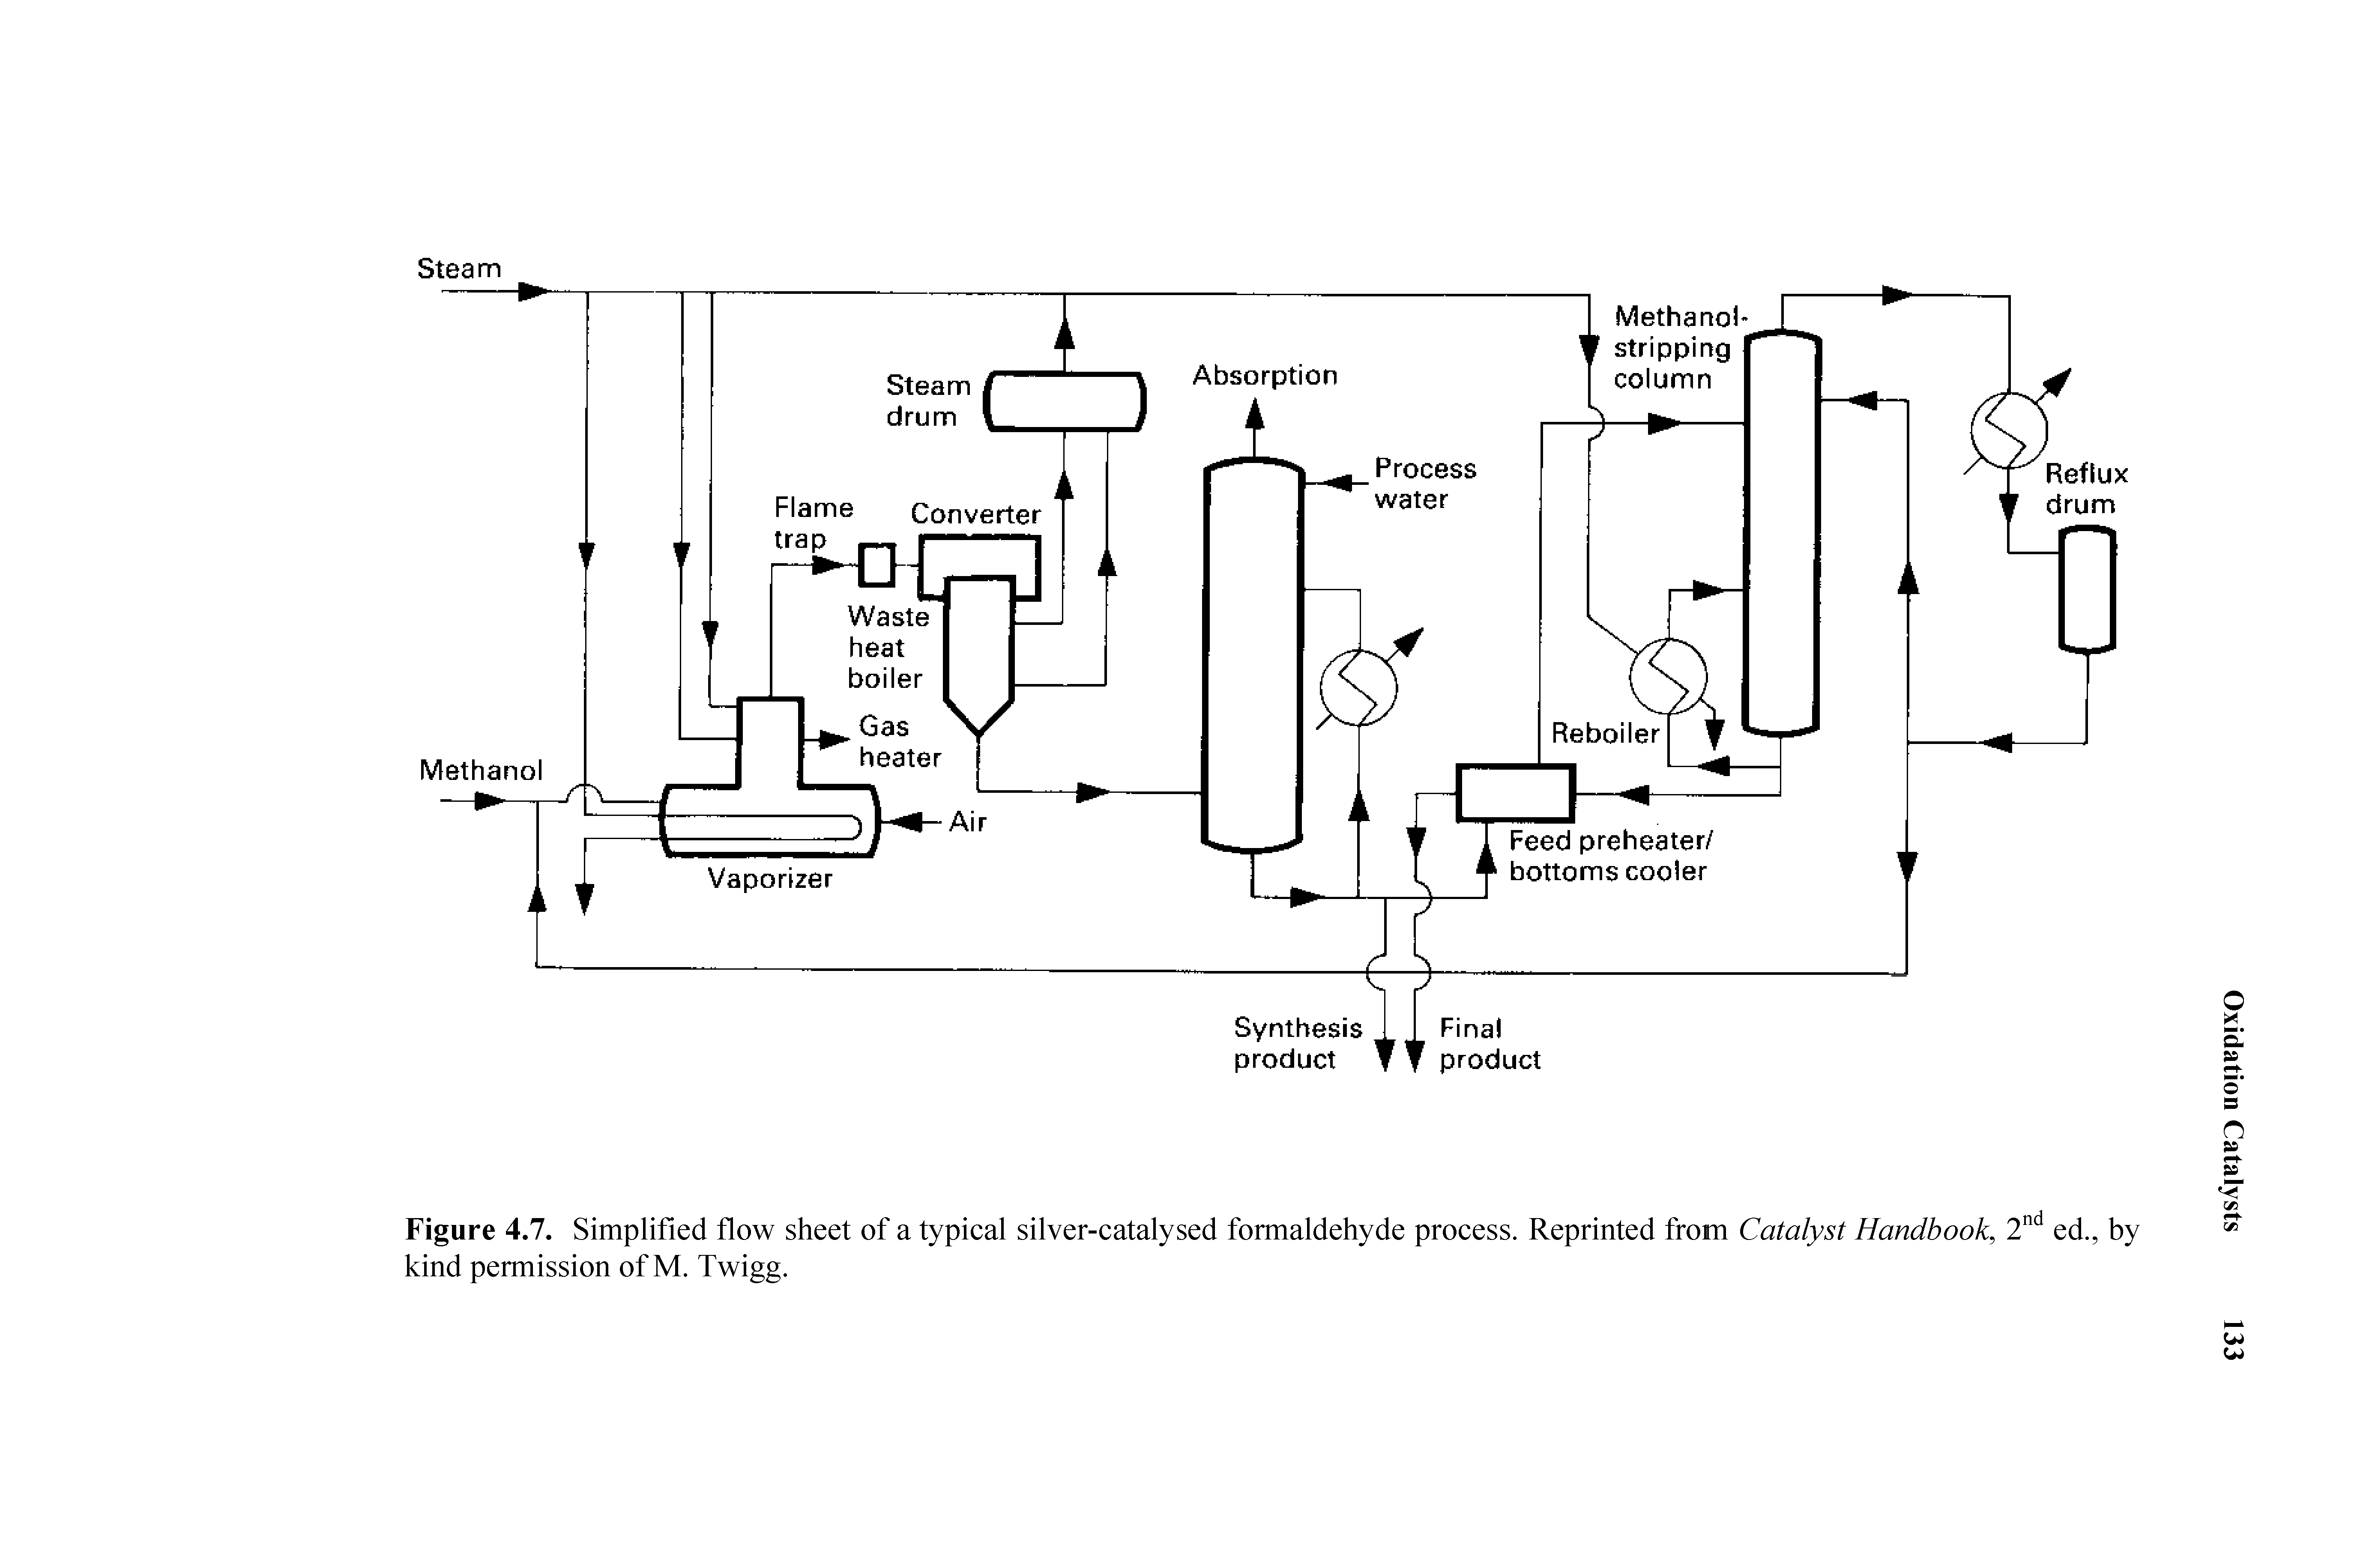 Figure 4.7. Simplified flow sheet of a typieal silver-catalysed formaldehyde process. Reprinted from Catalyst Handbook, ed., by kind permission of M. Twigg.